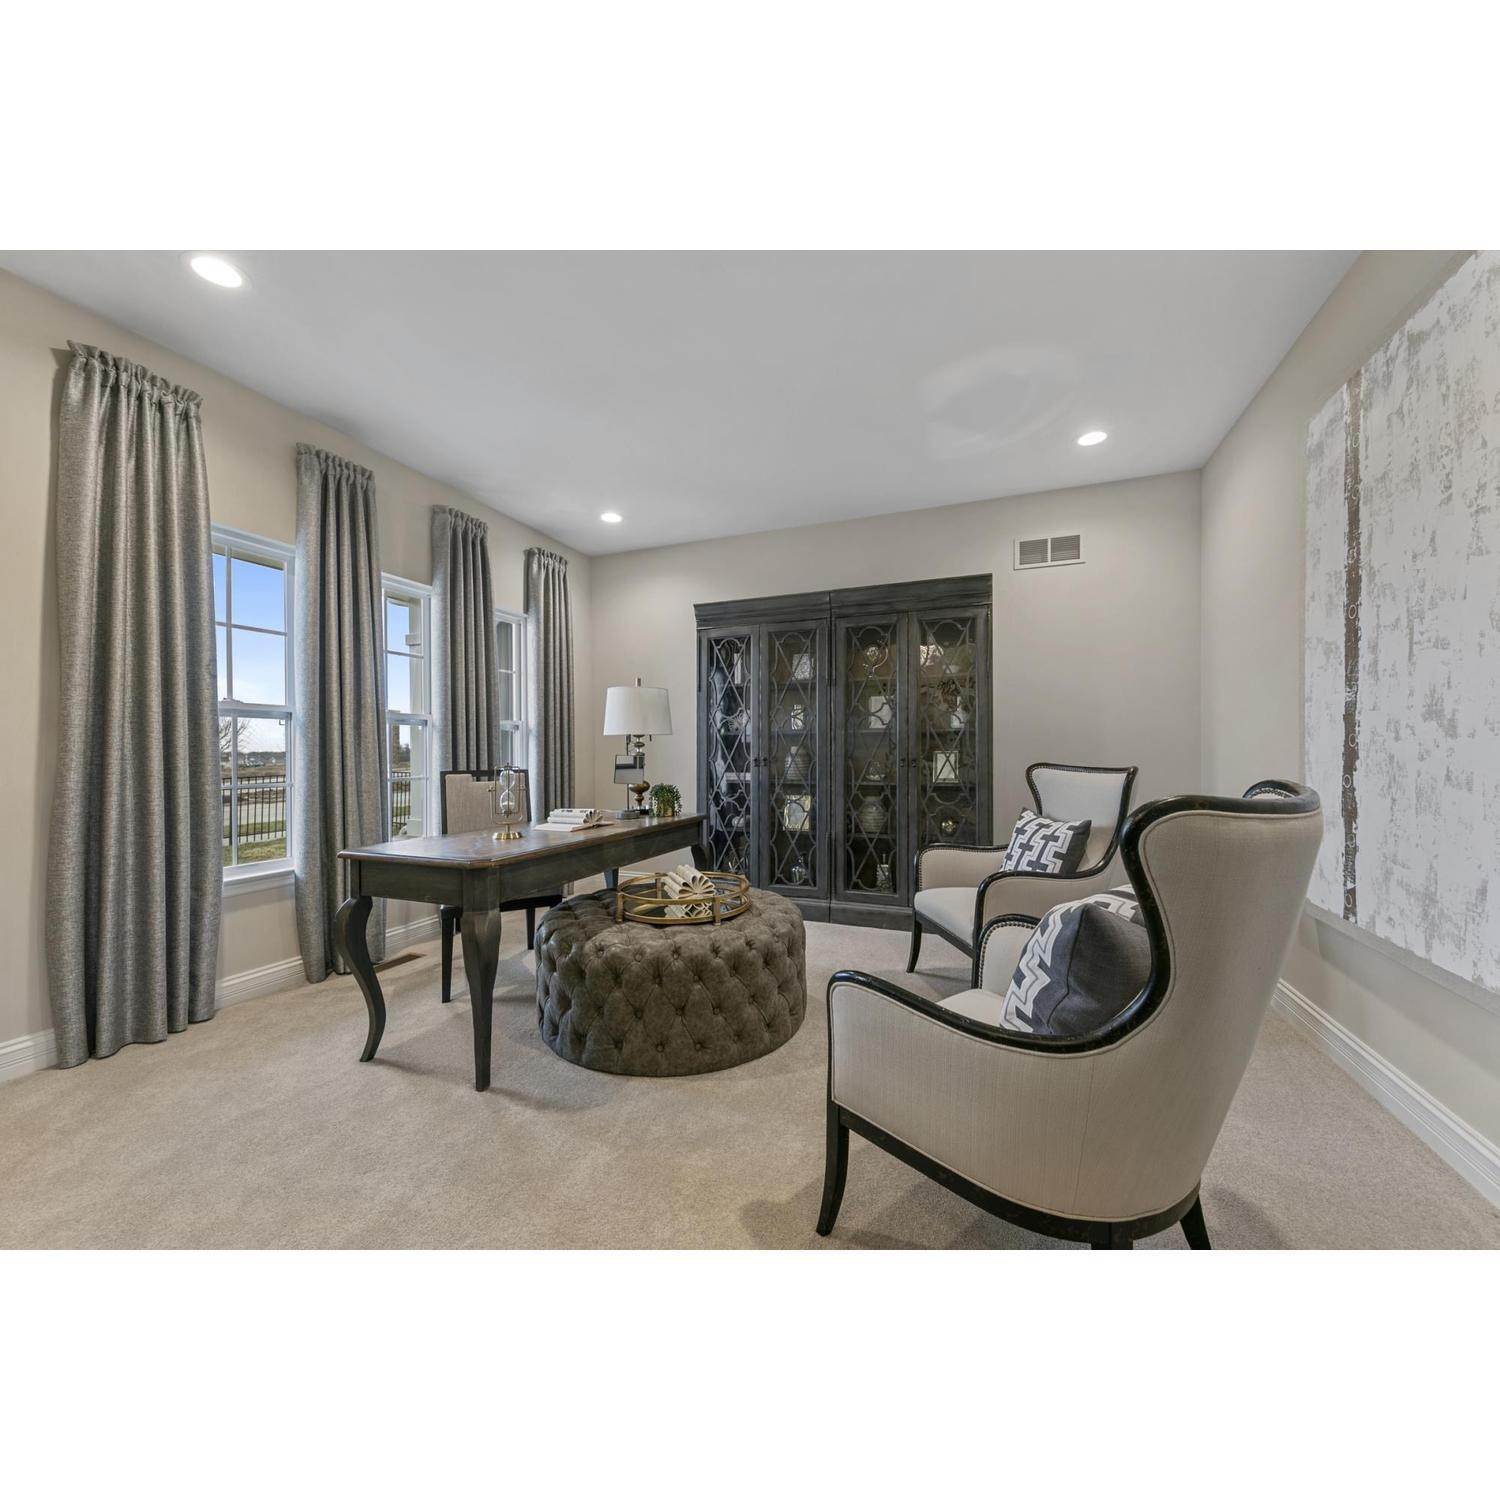 17. xây dựng tại 100 Royal Inverness Parkway, Dardenne Prairie, MO 63368